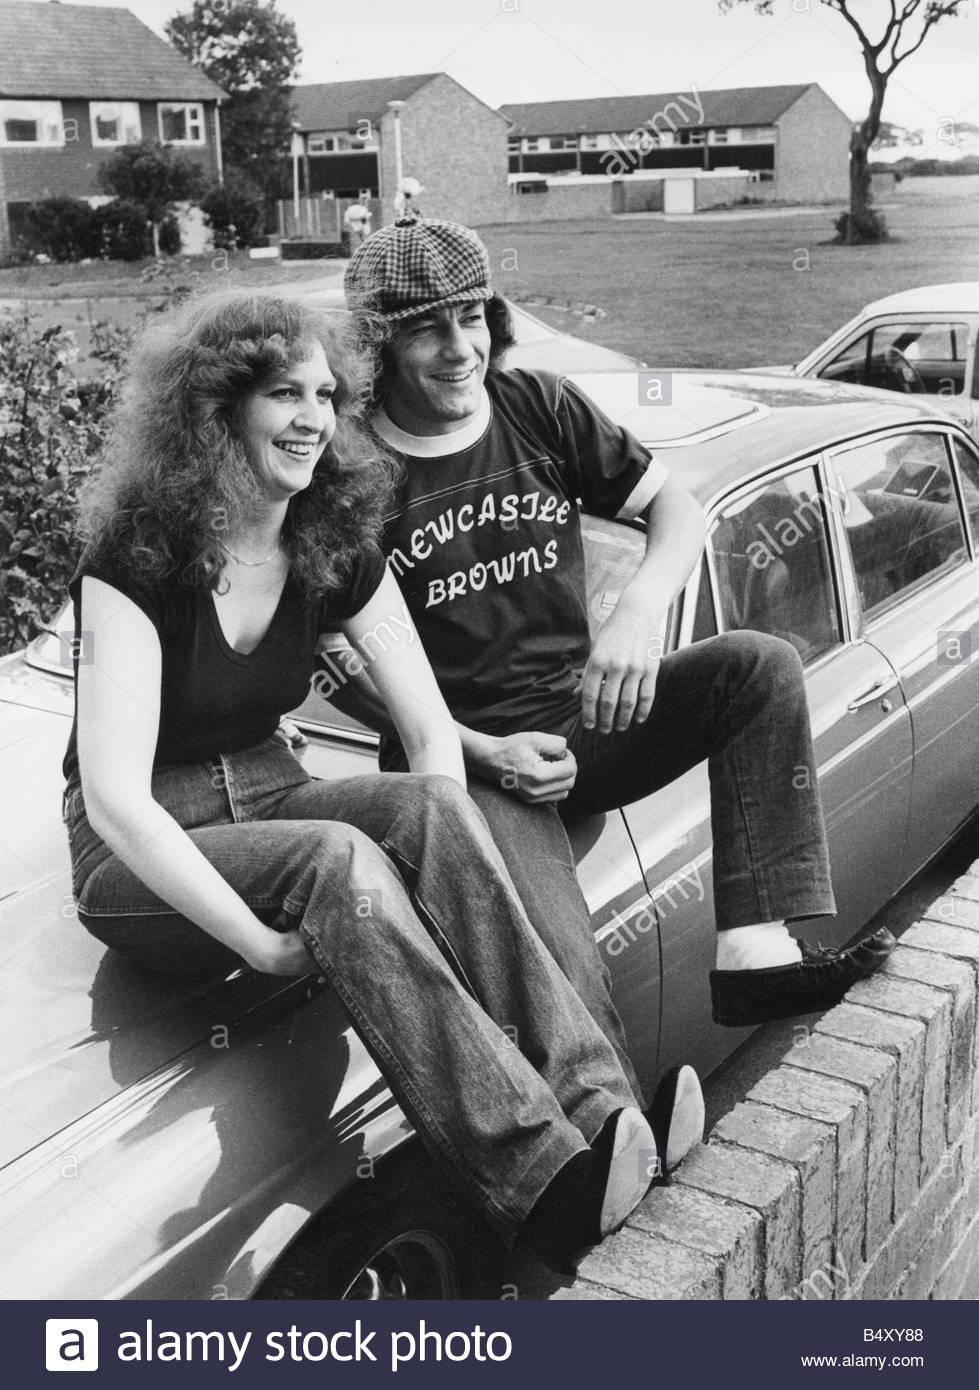 Brian Johnson, lead singer of the rock group AC/DC, at his North Shields home with his wife Carol on 14 October 1980.